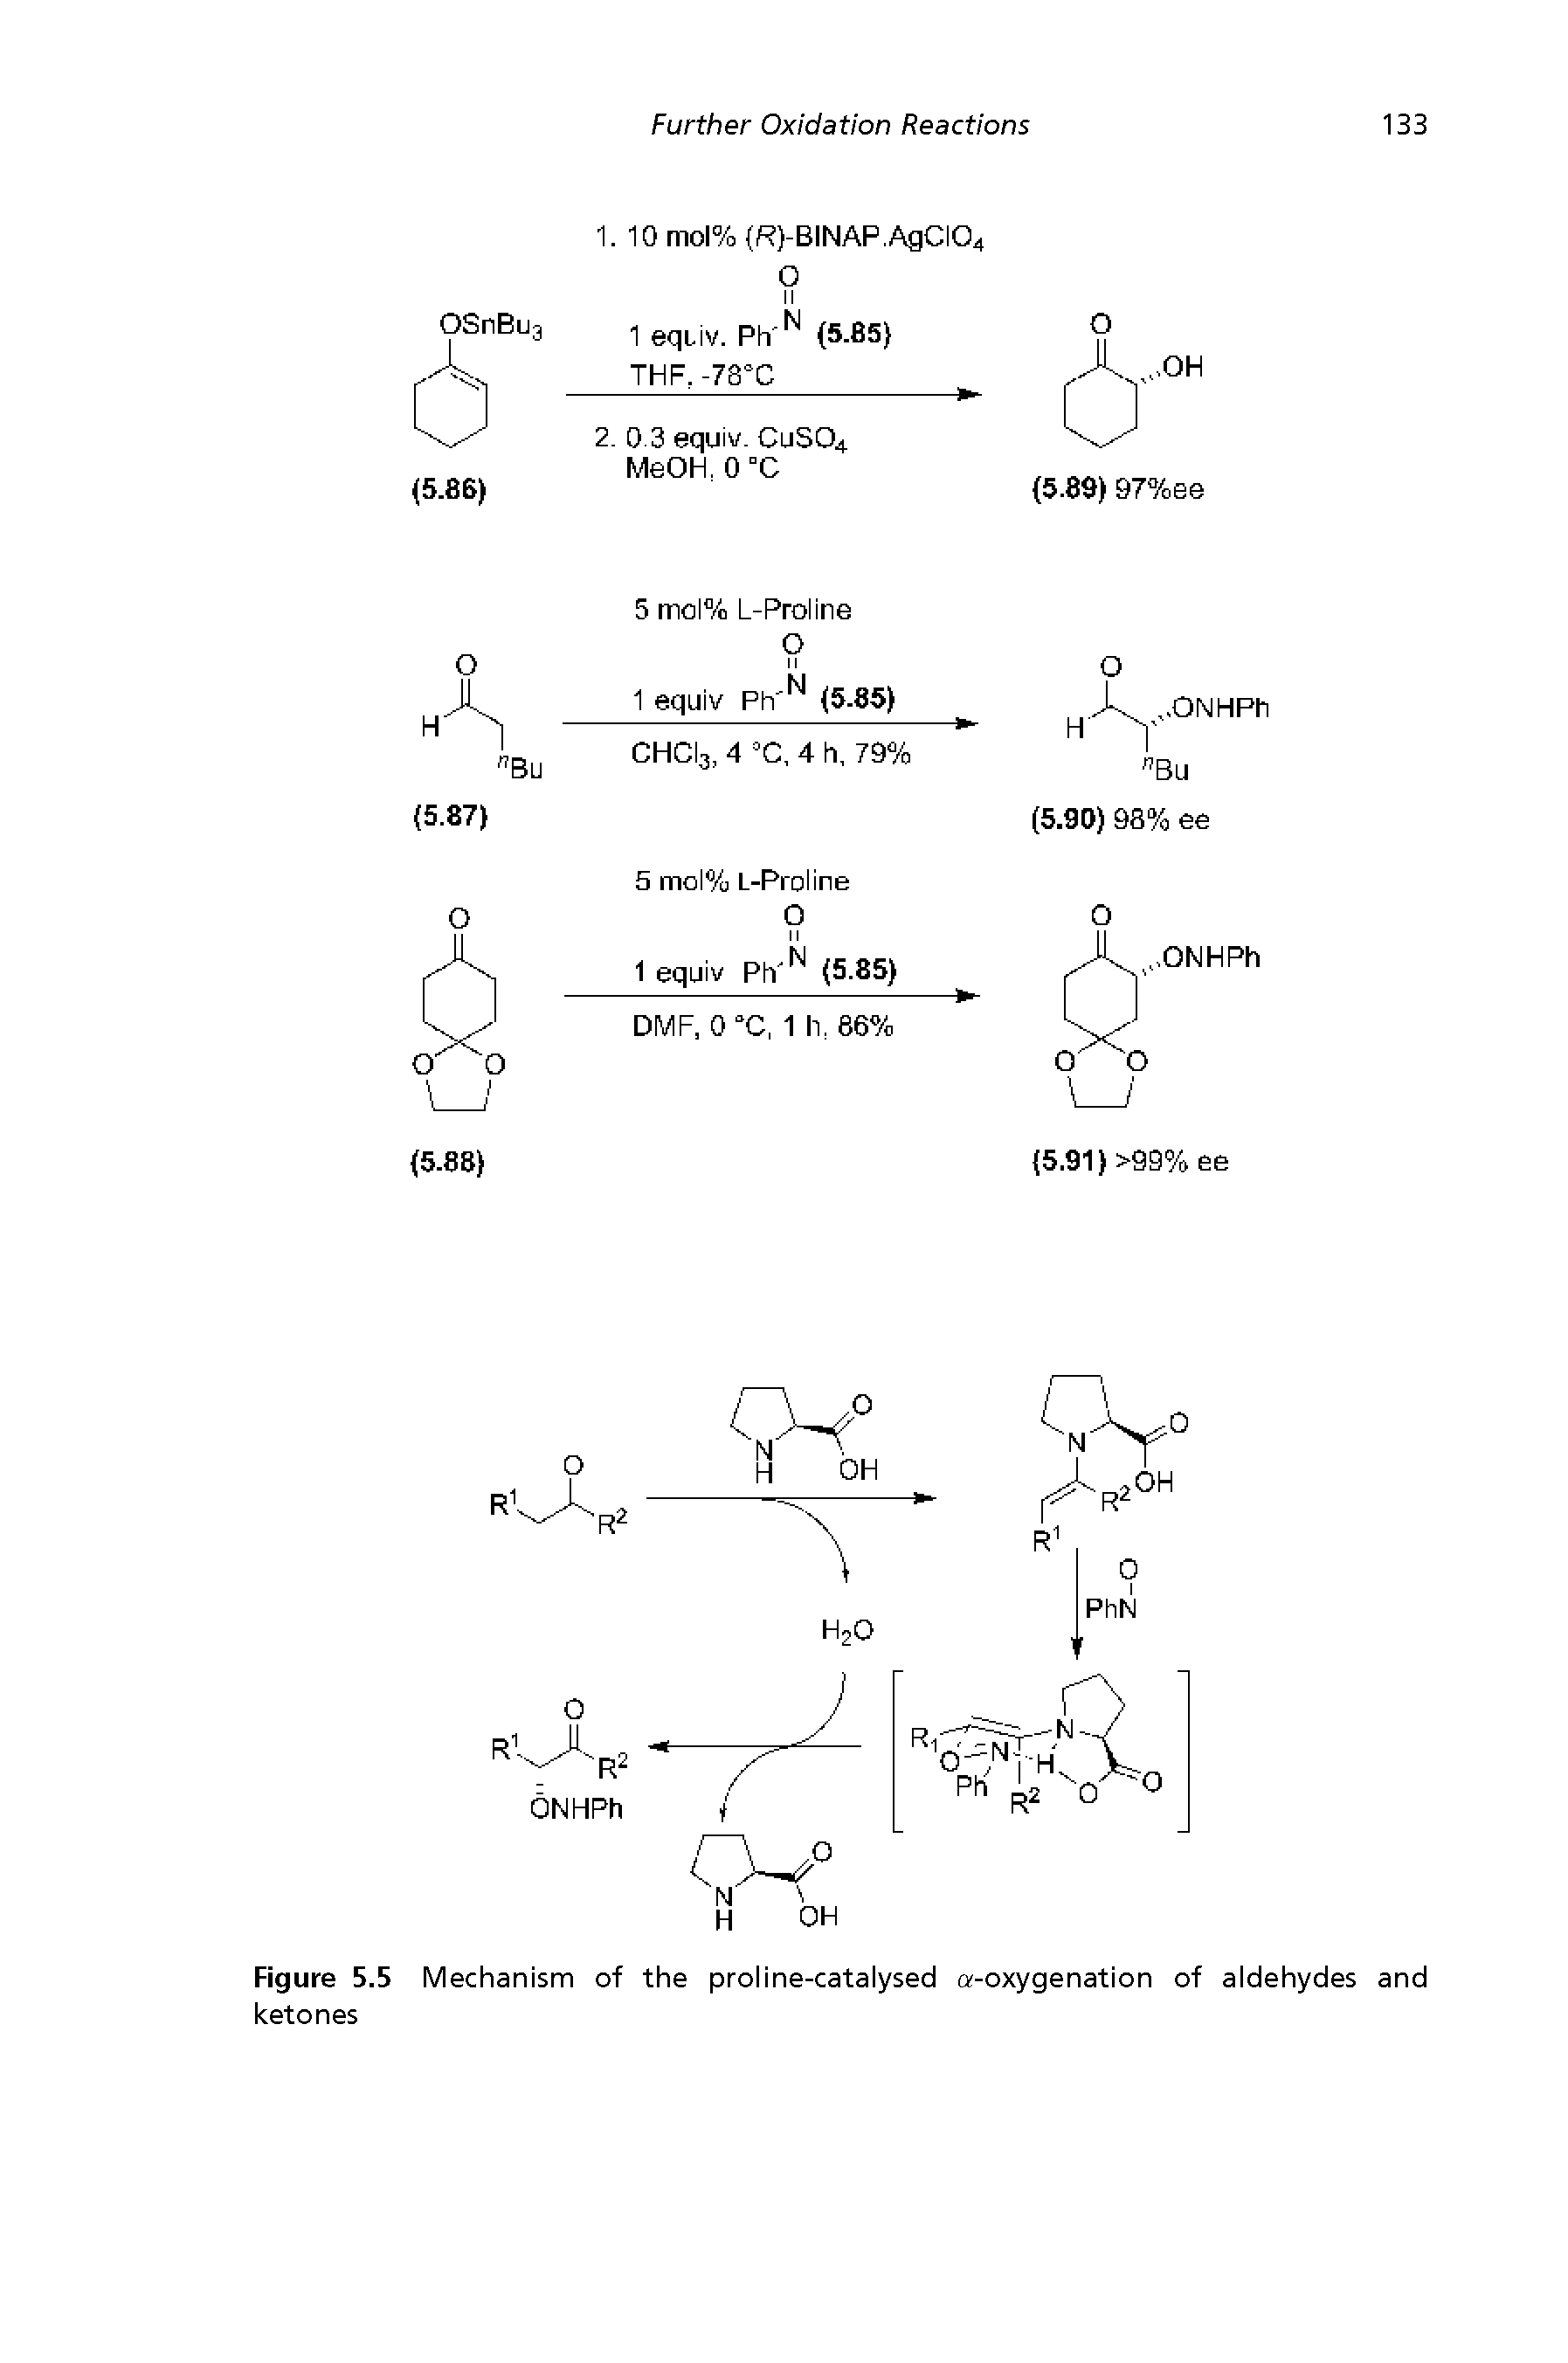 Figure 5.5 Mechanism of the proline-catalysed a-oxygenation of aldehydes and ketones...